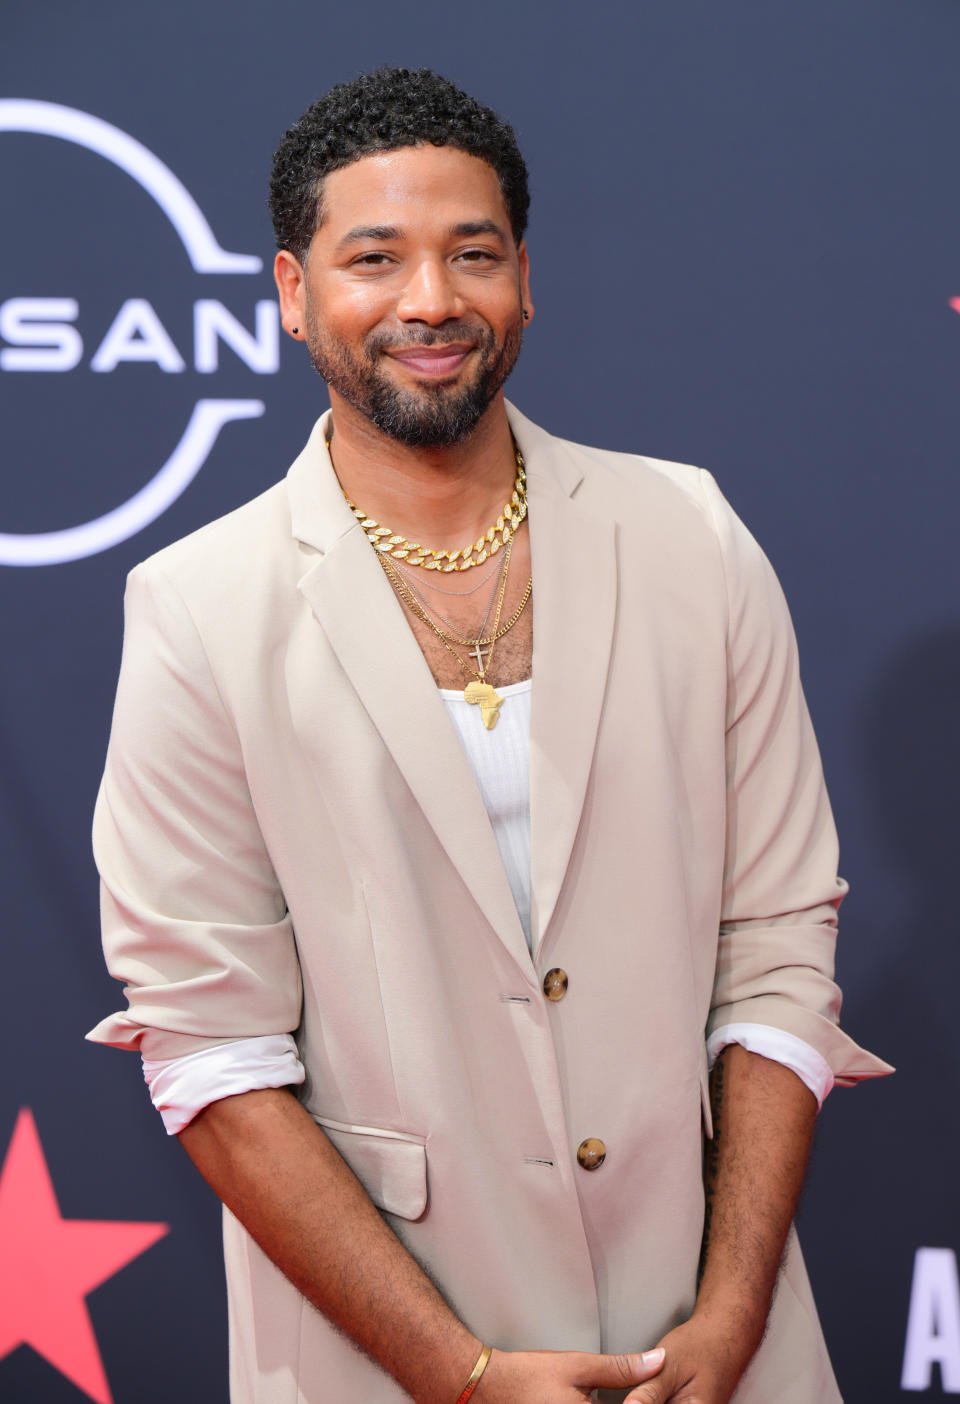 LOS ANGELES, CALIFORNIA - JUNE 26: Jussie Smollett attends the 2022 BET Awards at Microsoft Theater on June 26, 2022 in Los Angeles, California. (Photo by Prince Williams/ Getty Images)